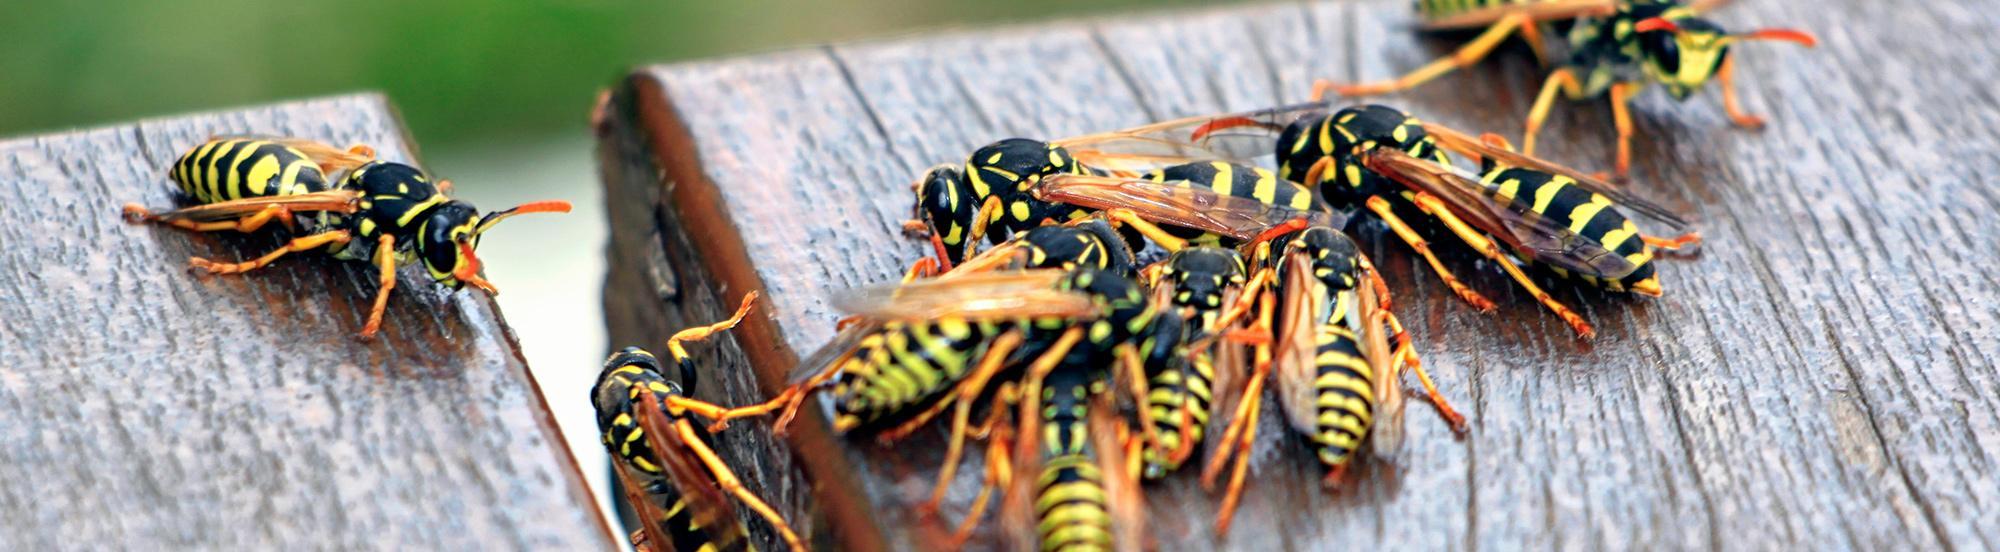 yellow jackets on picnic table